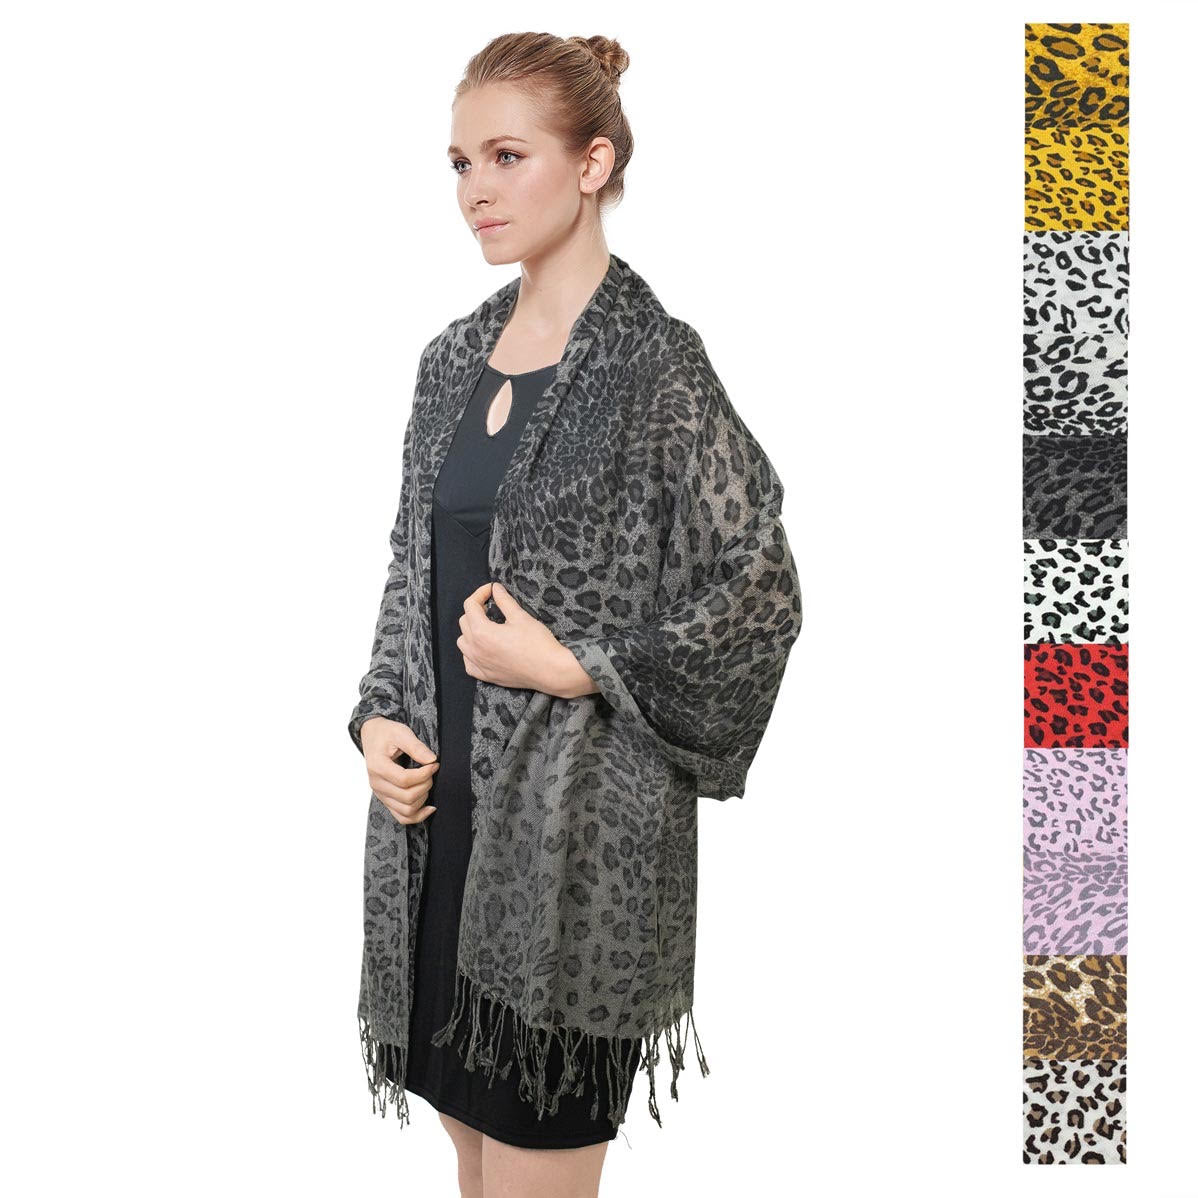 NYW057S  Leopard Print Pashmina Shawl Assorted Colors